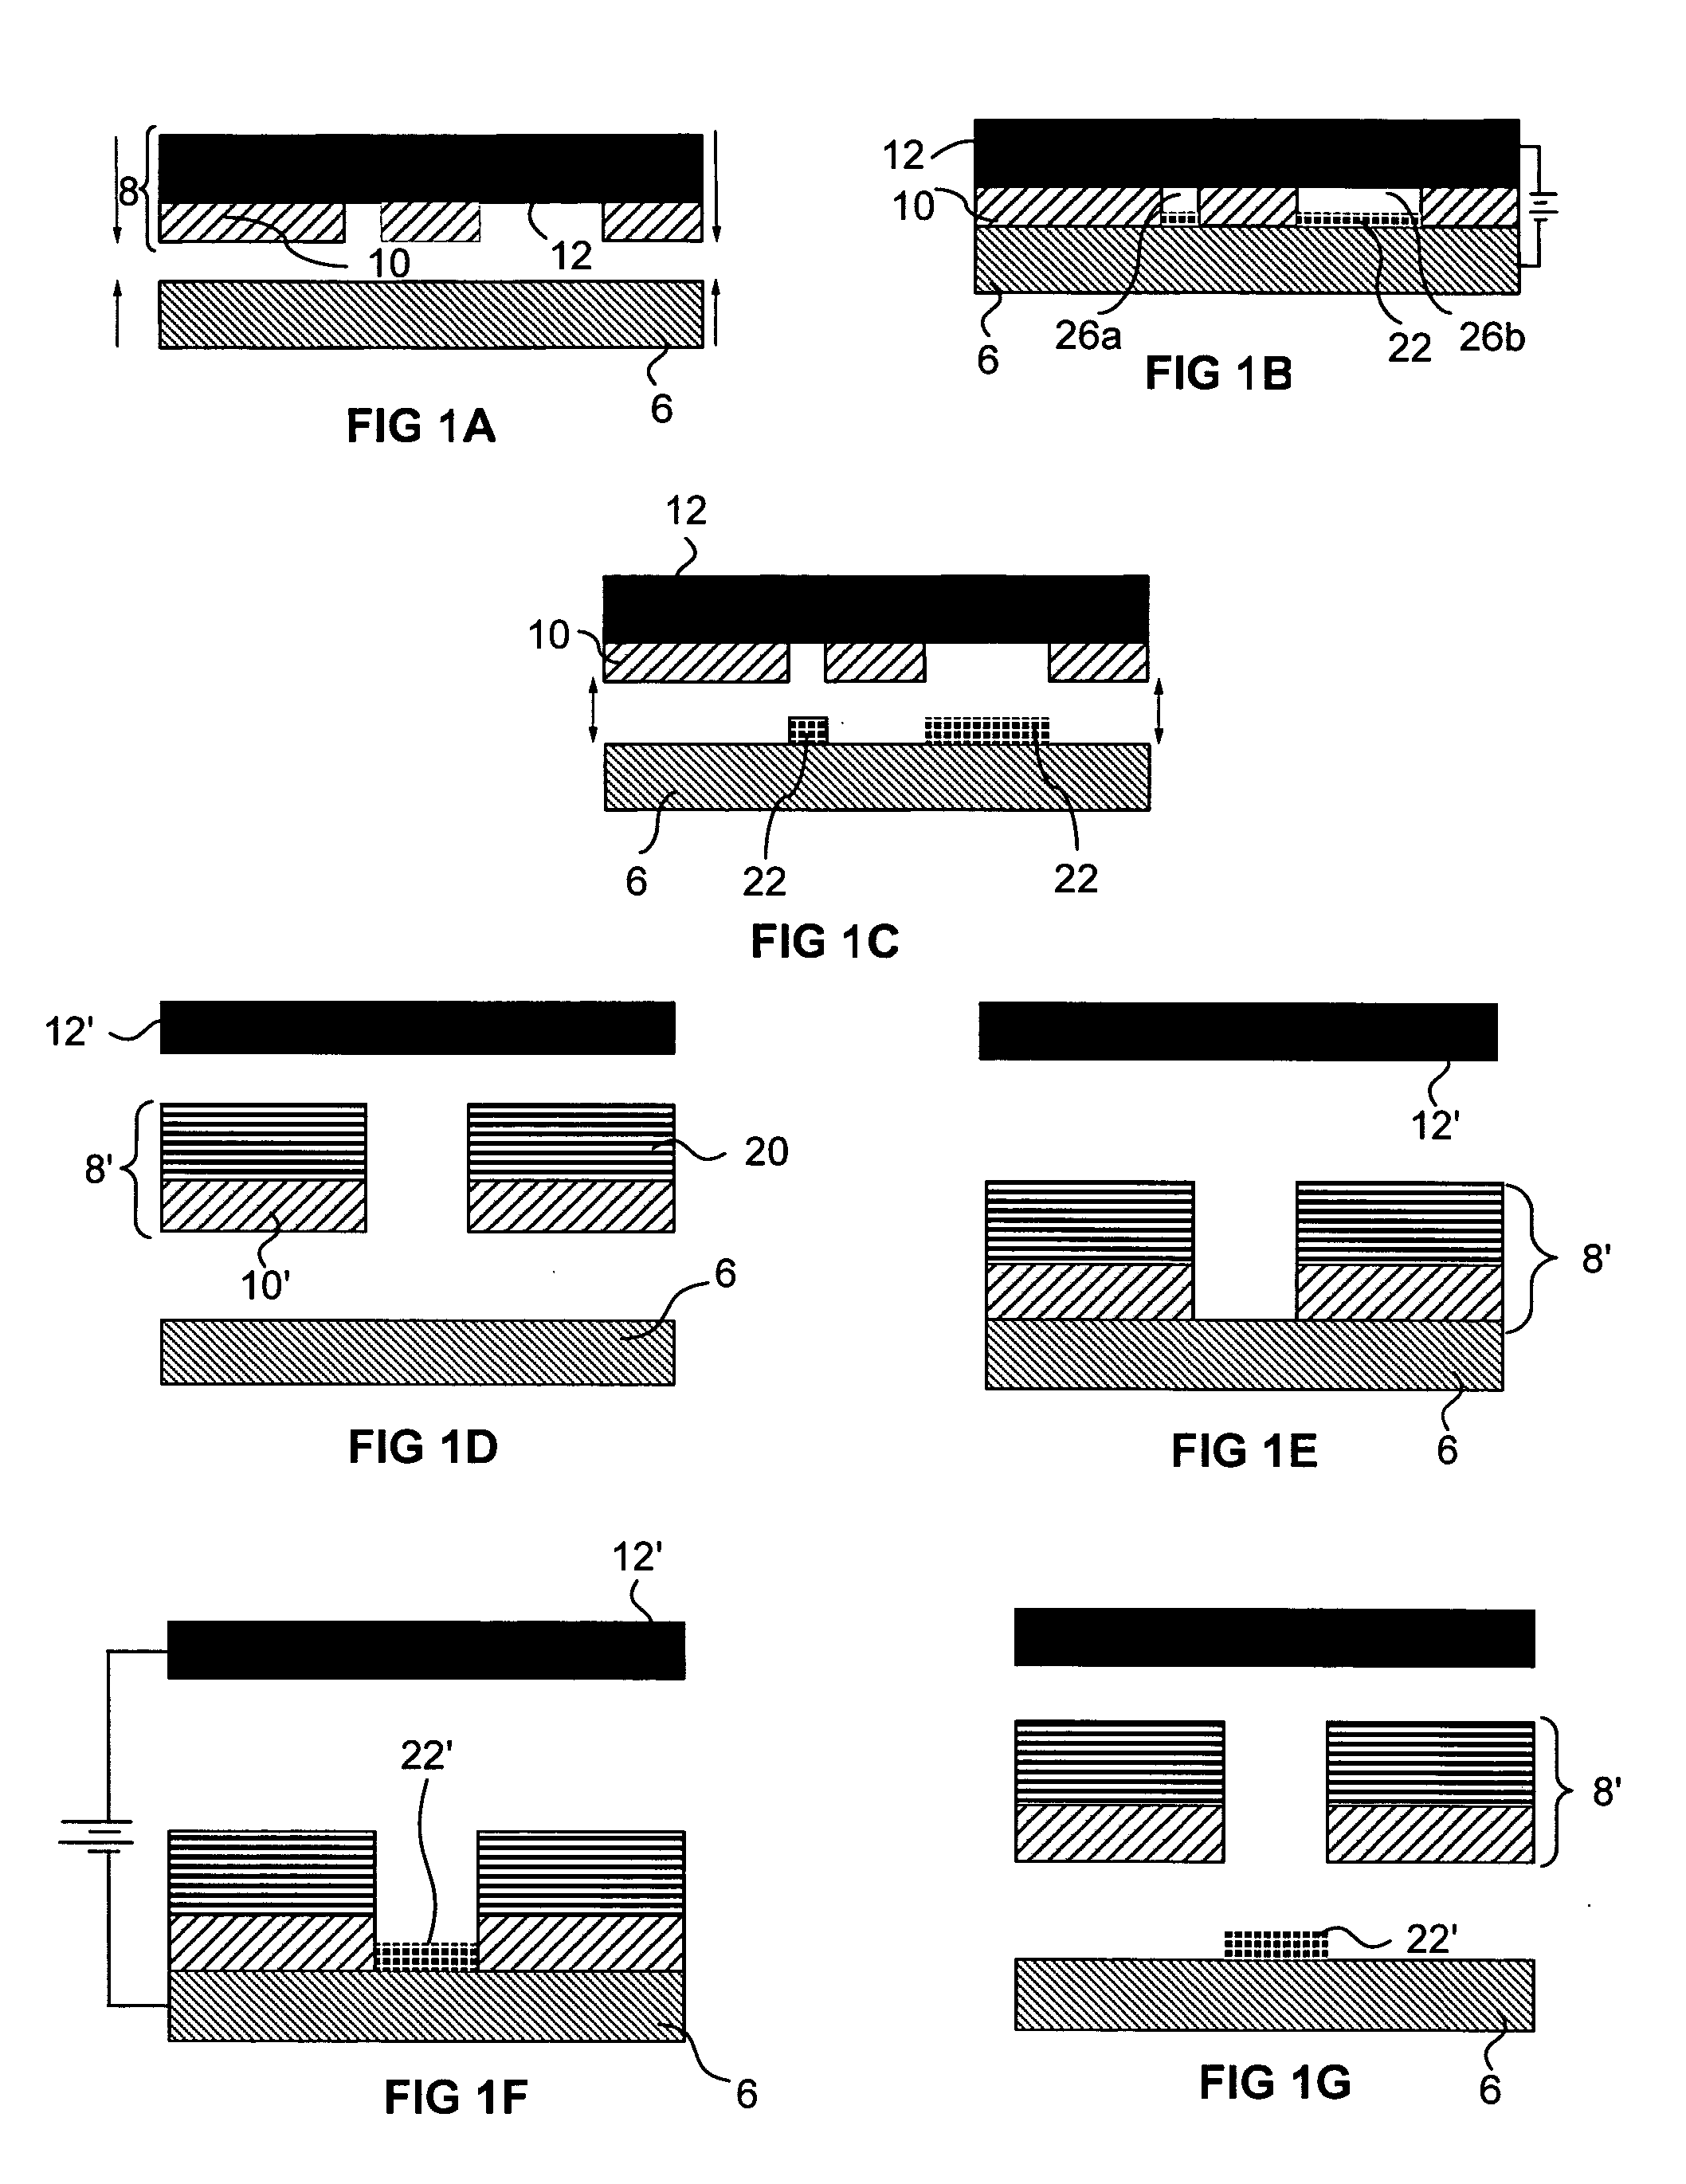 Electrochemical fabrication process including process monitoring, making corrective action decisions, and taking appropriate actions